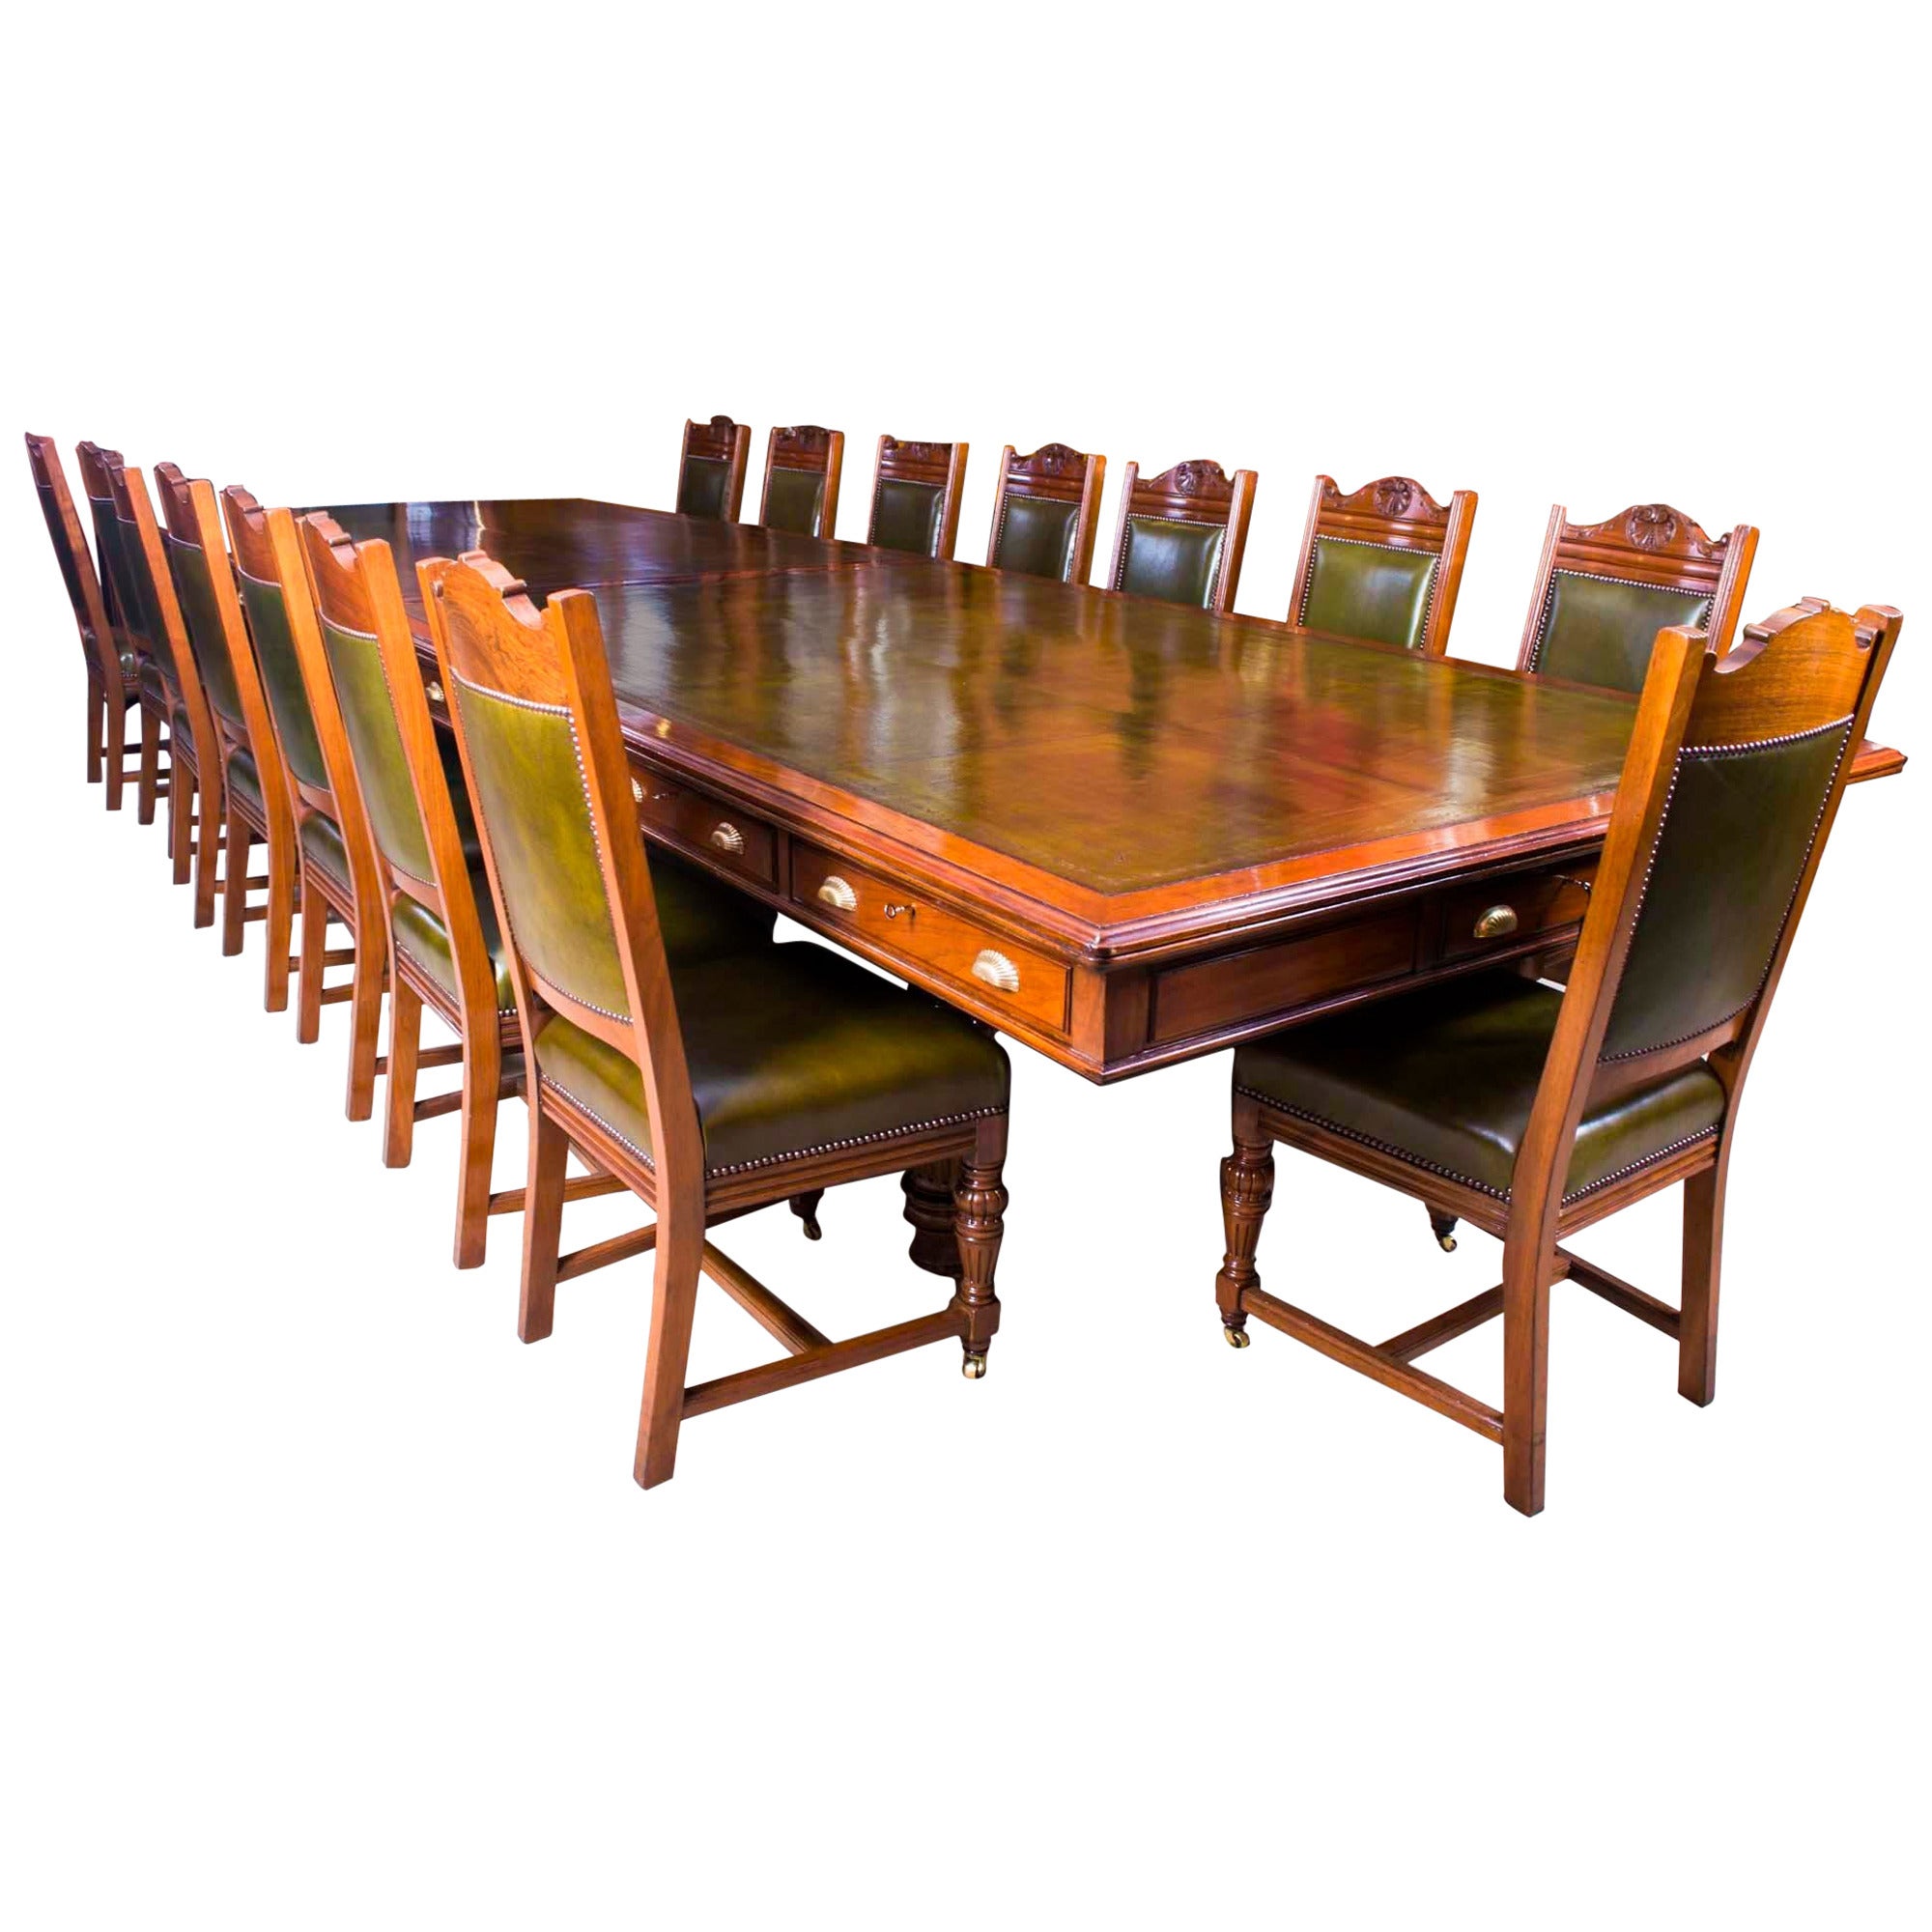 Antique Victorian Boardroom Table with 16 Chairs, circa 1850